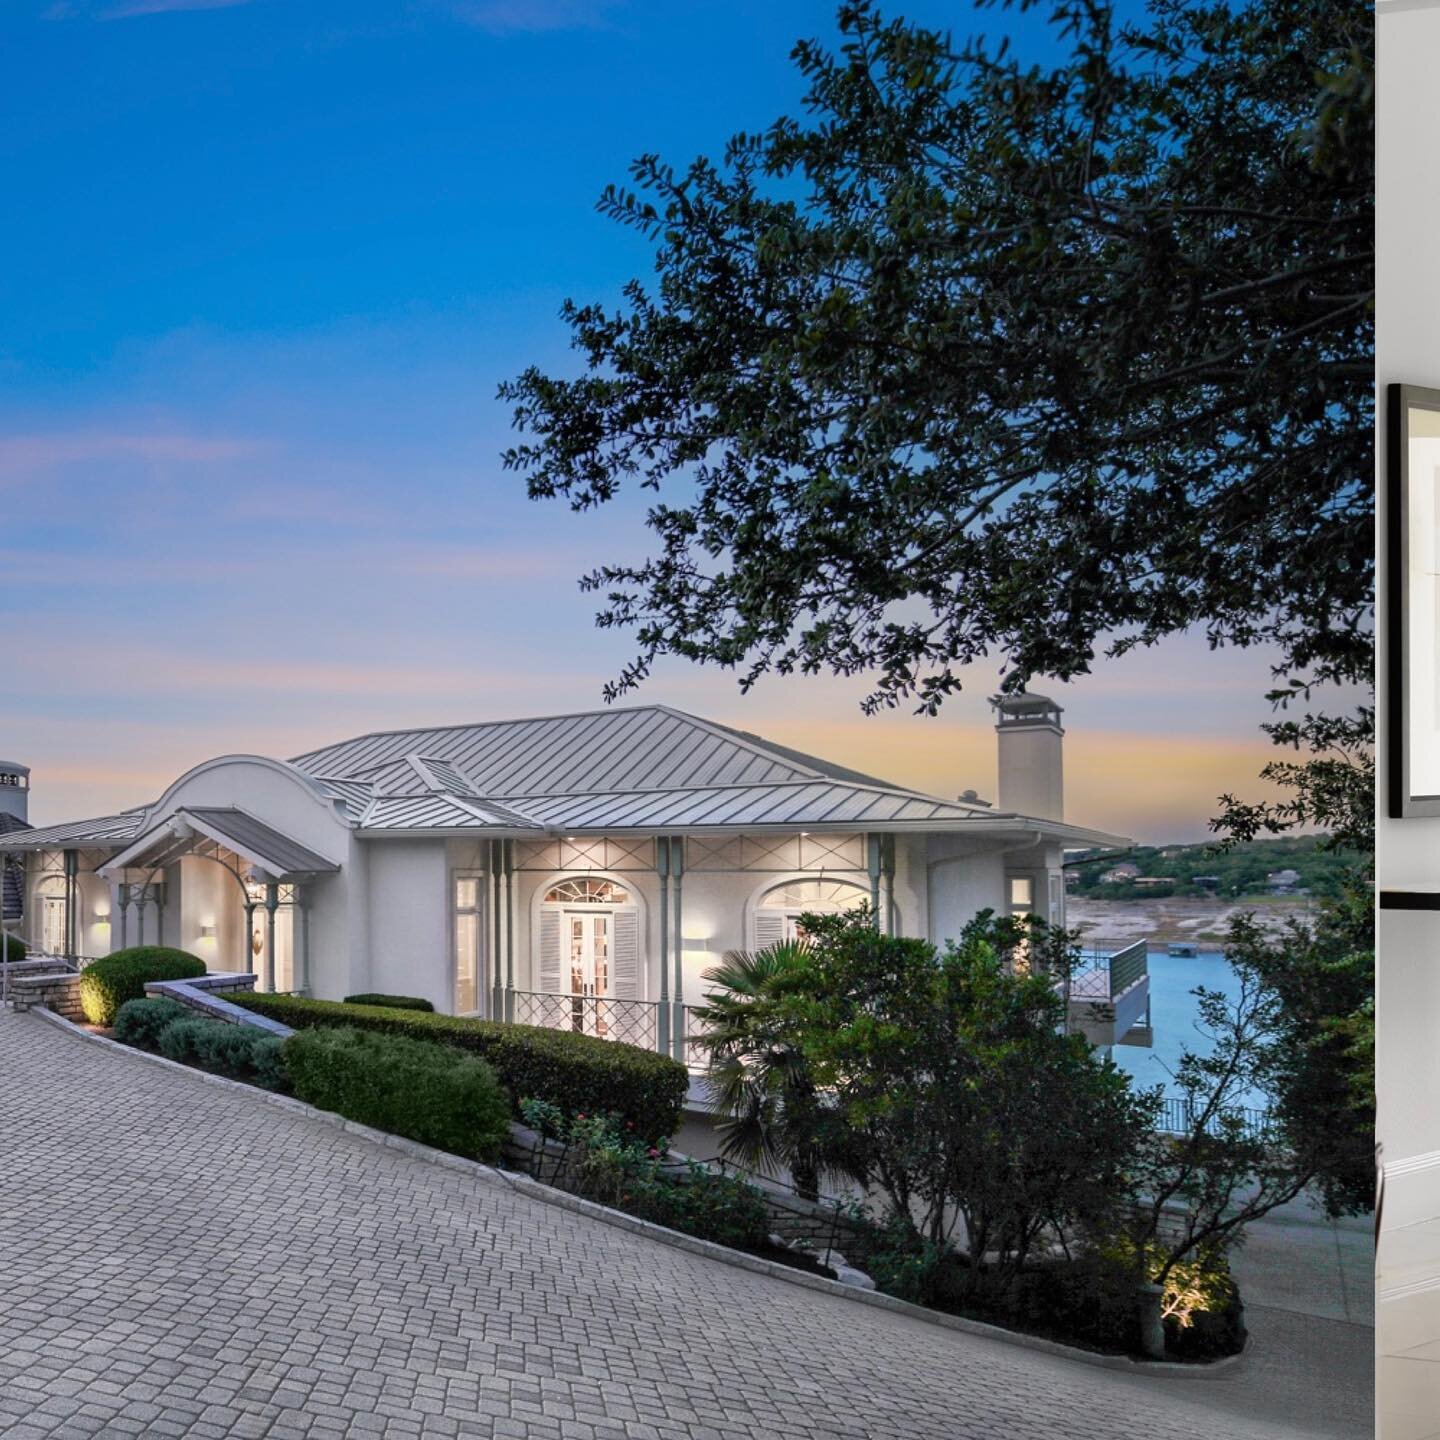 𝐅𝐫𝐢𝐝𝐚𝐲 𝐅𝐞𝐚𝐭𝐮𝐫𝐞 ✨
Privately listed on #laketravis 
&mdash;
Welcome to Boho Lakehouse on Lake Travis! 715 Cutlass, a vision of glass walls elevated over Lake Travis with views that span miles of the Lake and Hill Country. For those who val